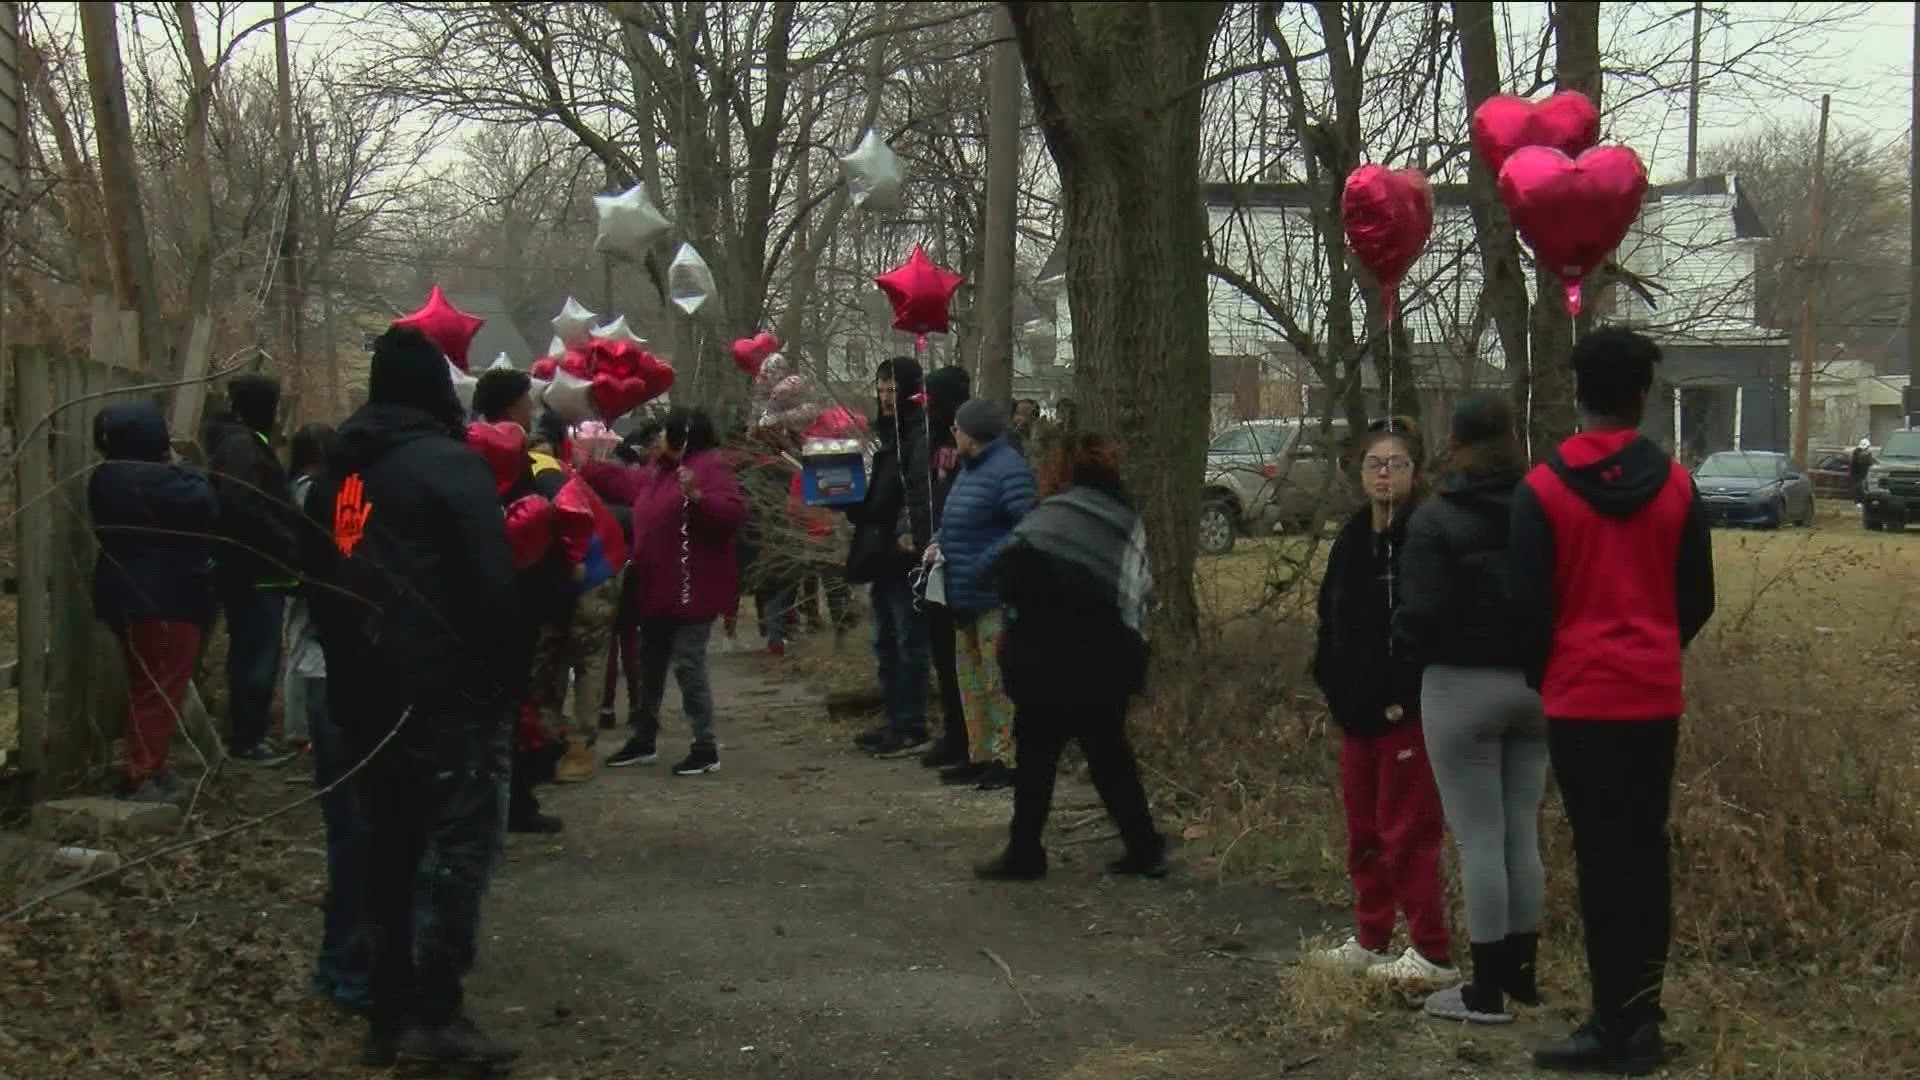 Nearly 100 people gathered in the alley where De'Asia Green was found dead, but a gunshot-like noise ended the night early.